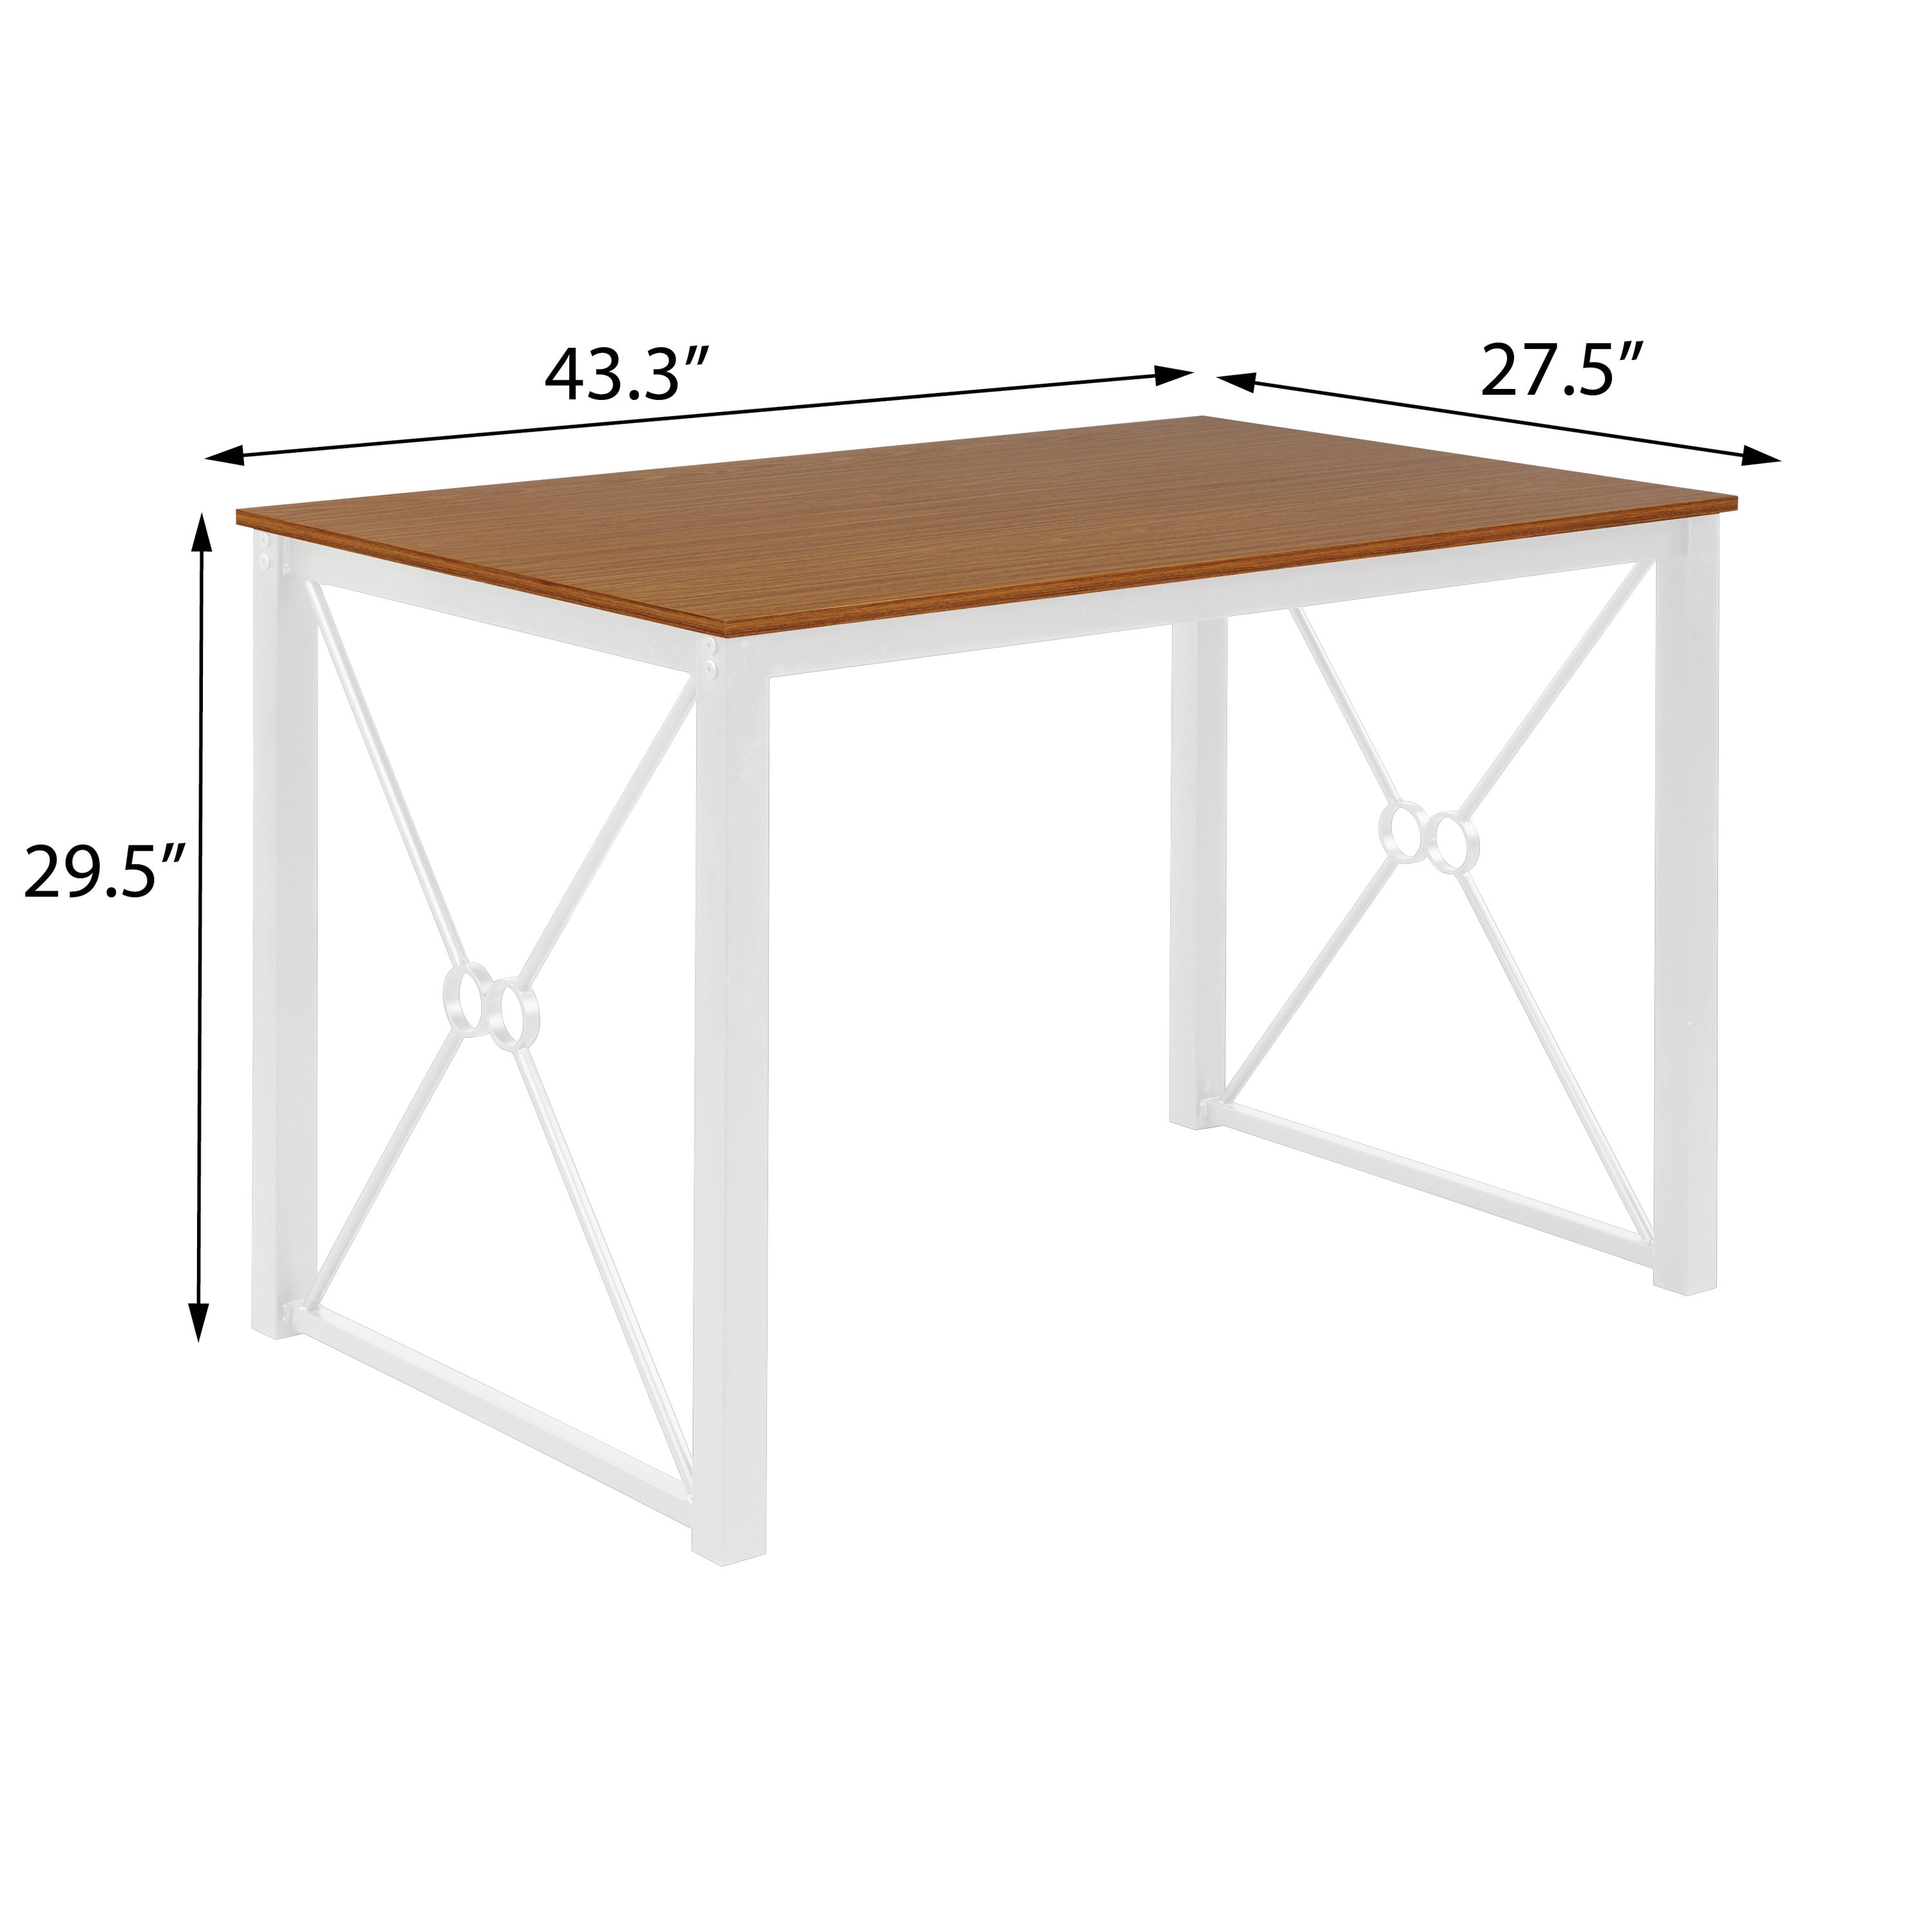 CASAINC White Contemporary/Modern Dining Table, Mdf with Metal Base 43 ...